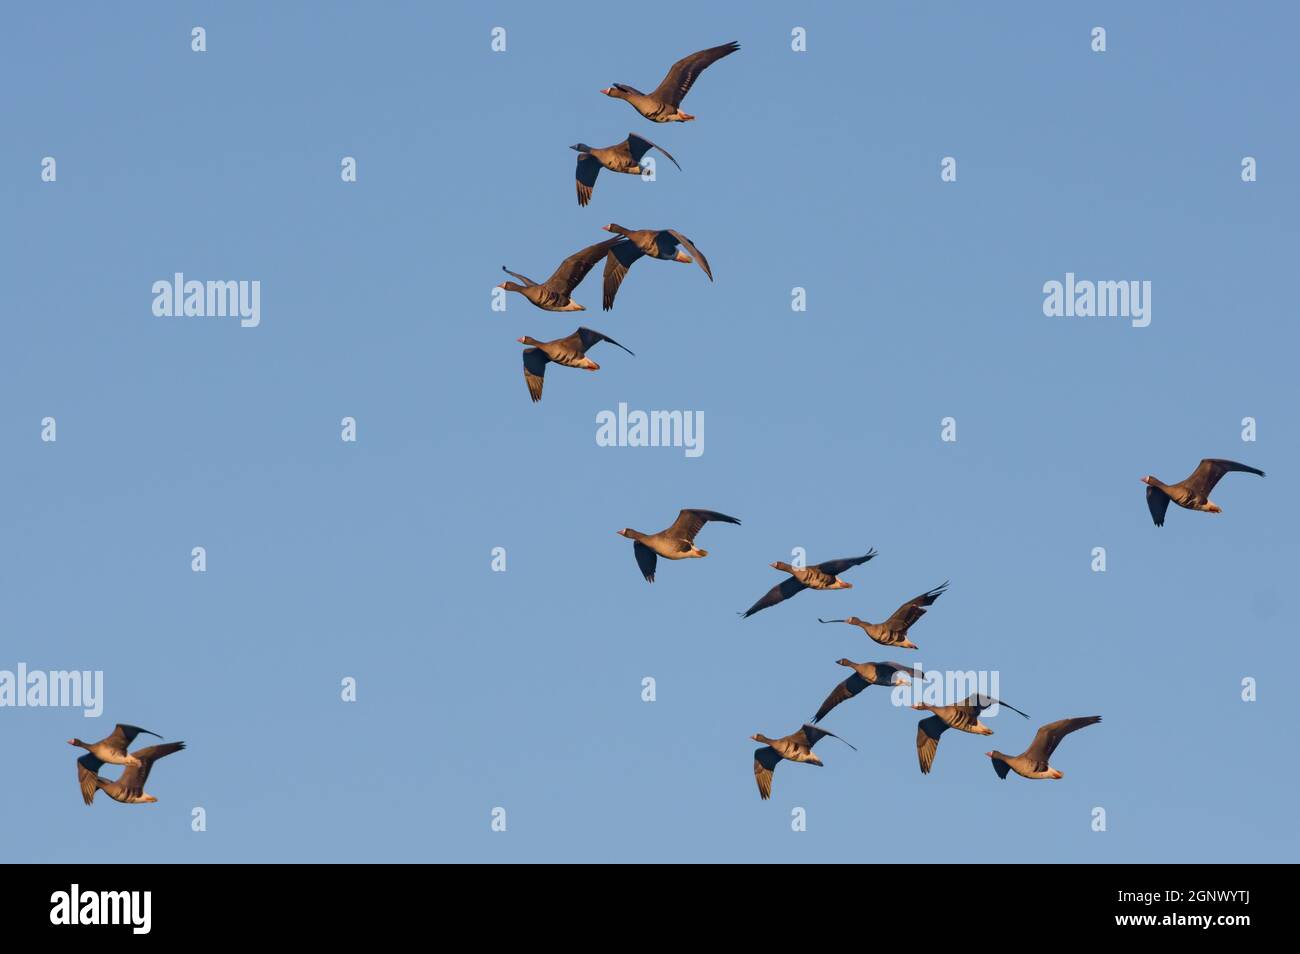 Average flock of greater white-fronted geese (Anser albifrons)  in spring flight over morning blue sky Stock Photo